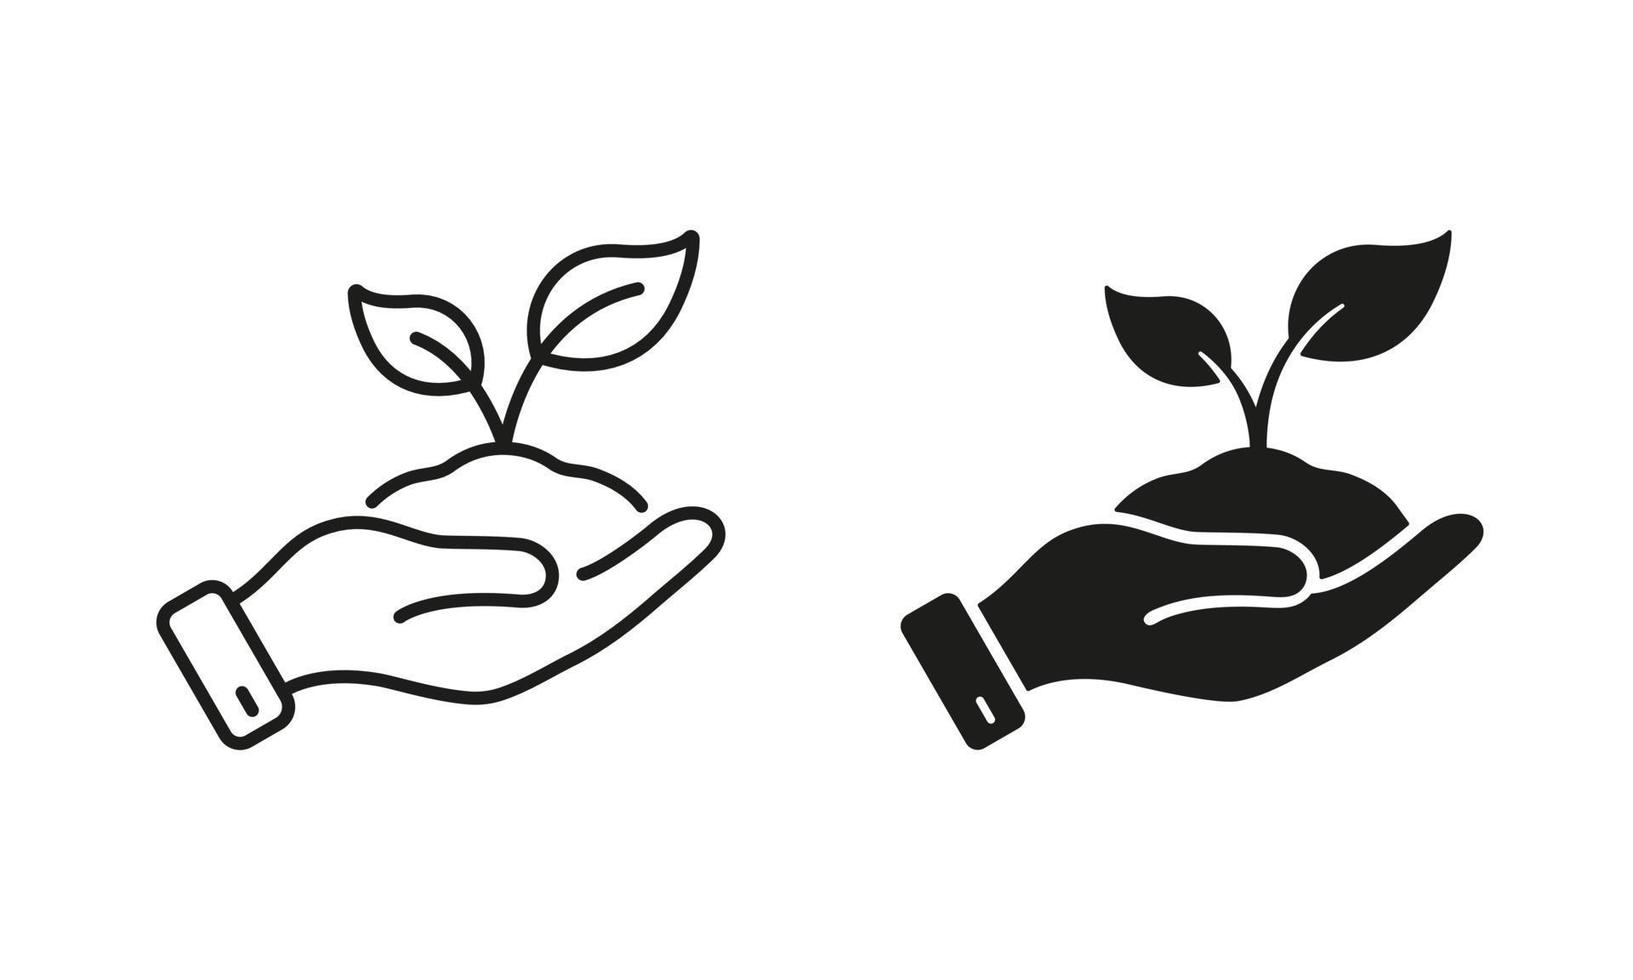 Ecology Organic Seedling Line and Silhouette Icon Set. Growth Eco Tree Environment. Plant in Human Hand Symbol Collection on White Background. Agriculture Concept. Isolated Vector Illustration.